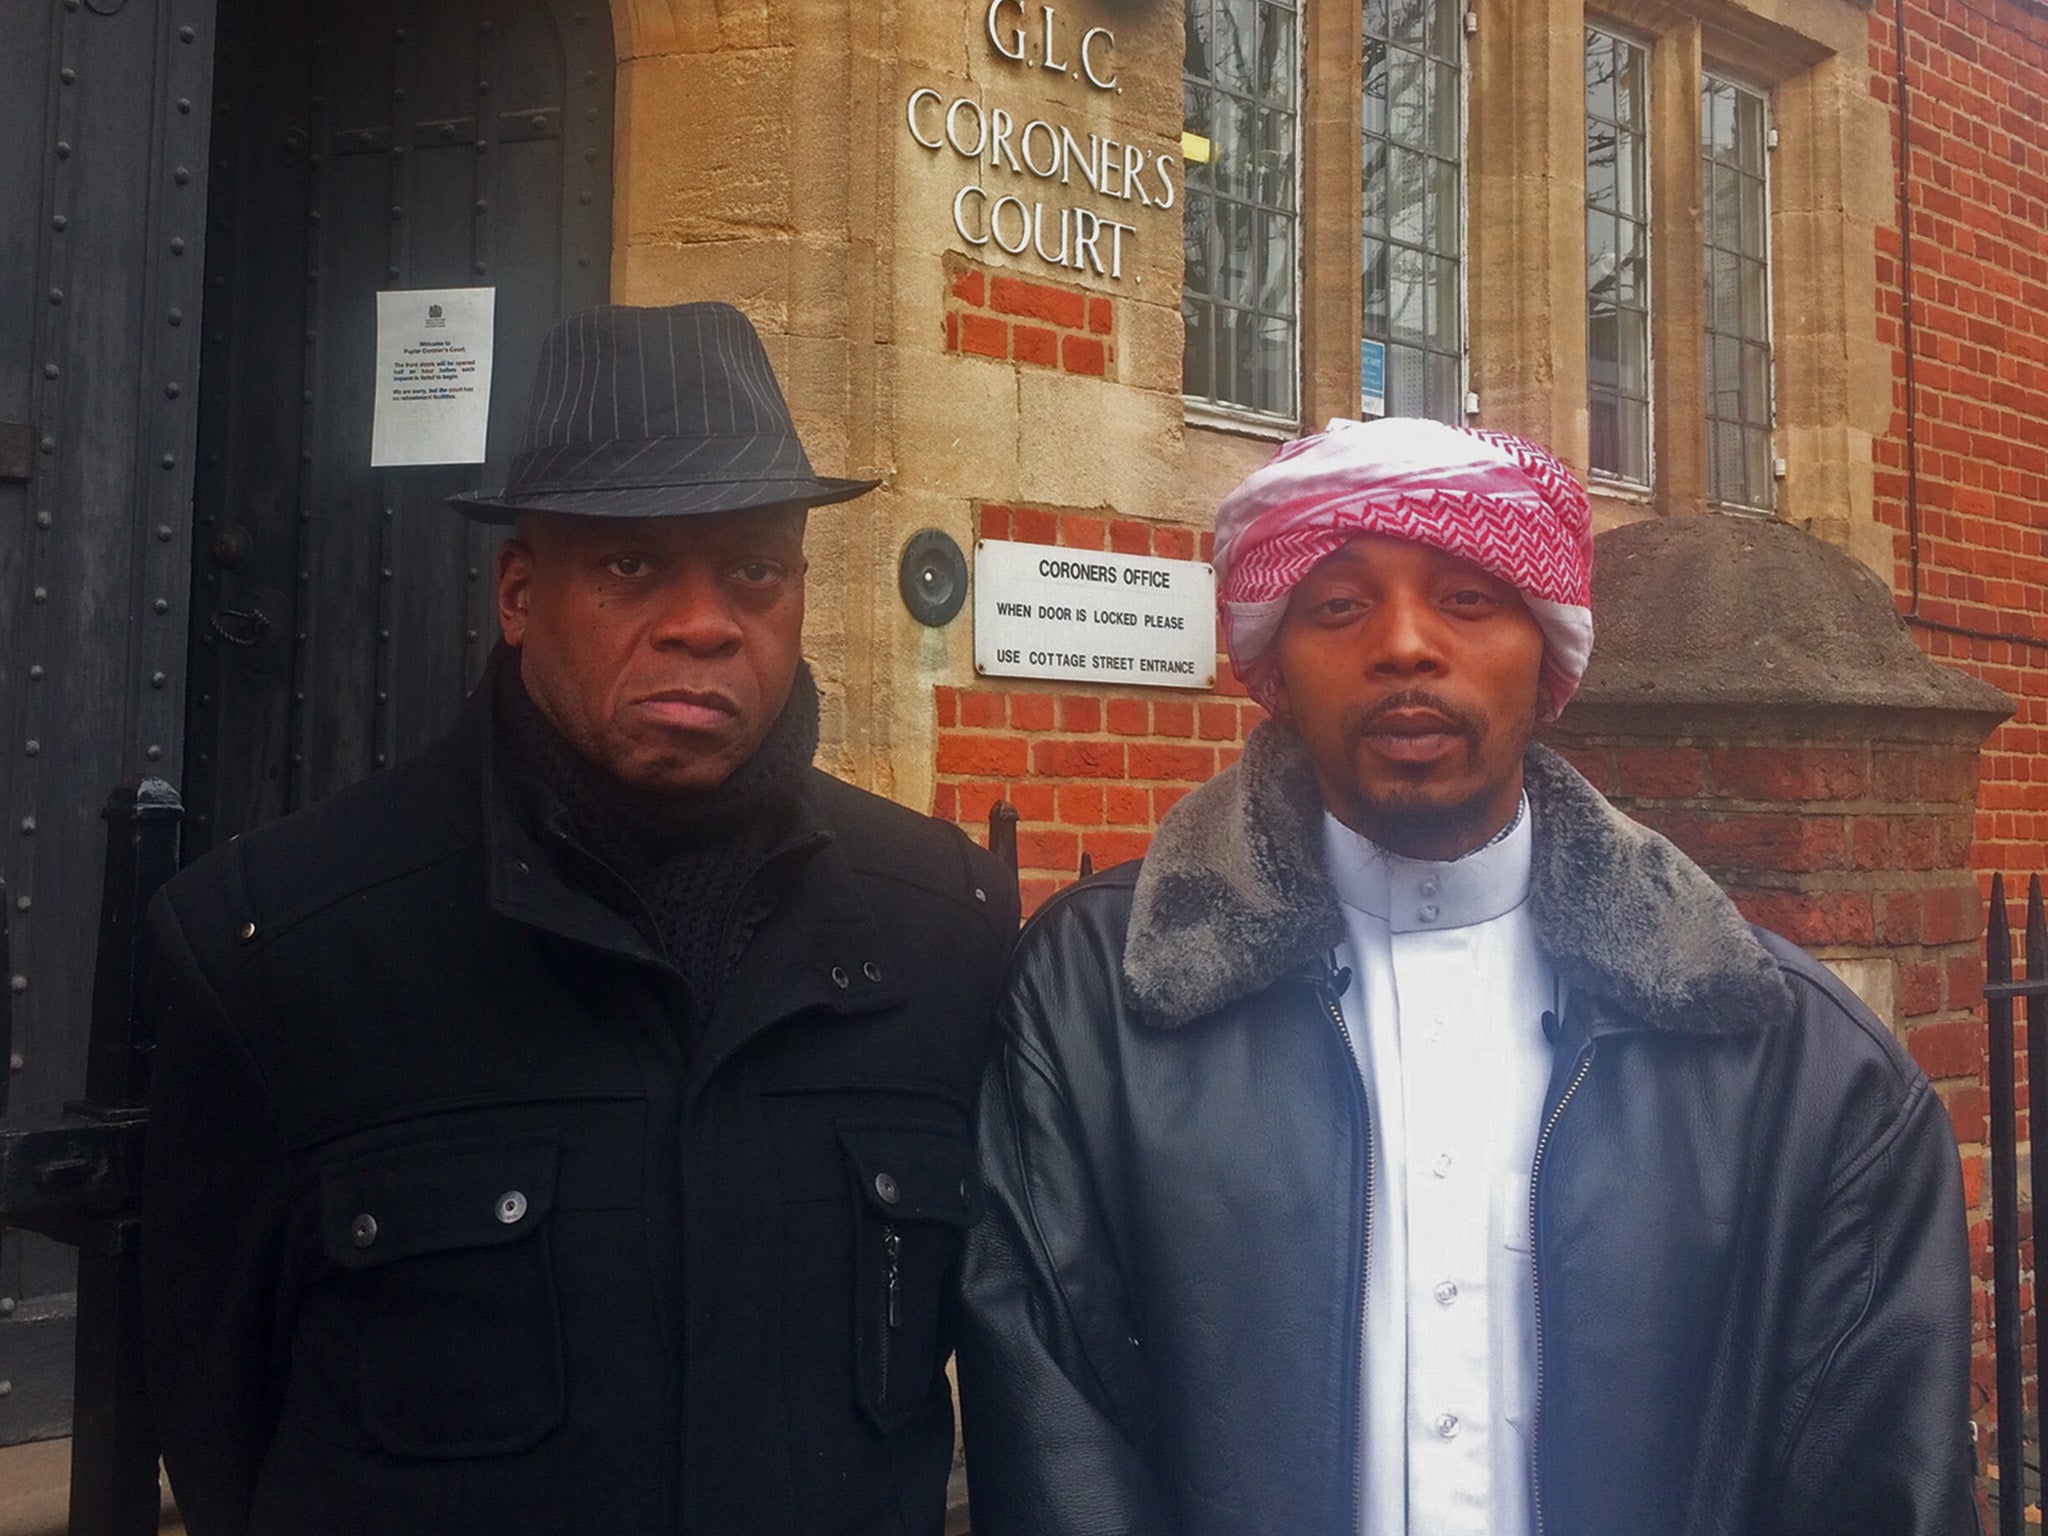 Mr Charles' great uncle and father, John Noblemunn and Esia Abu Mohammed, said granting the officer anonymity demonstrates the 'lack of transparency' in the justice system